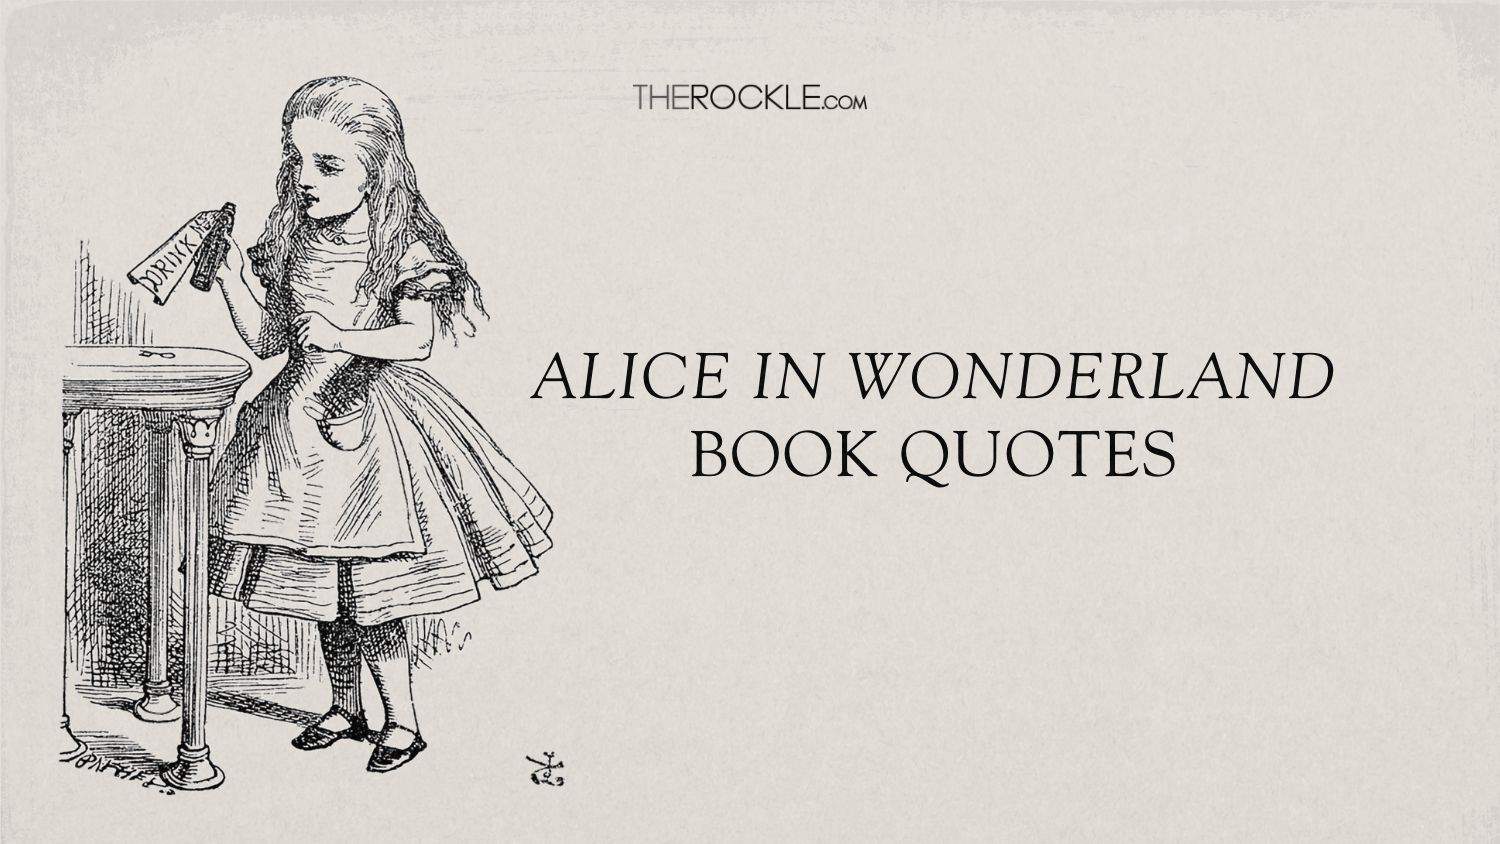 Sip Some Tea and Enjoy These 10 Charming Alice in Wonderland Quotes